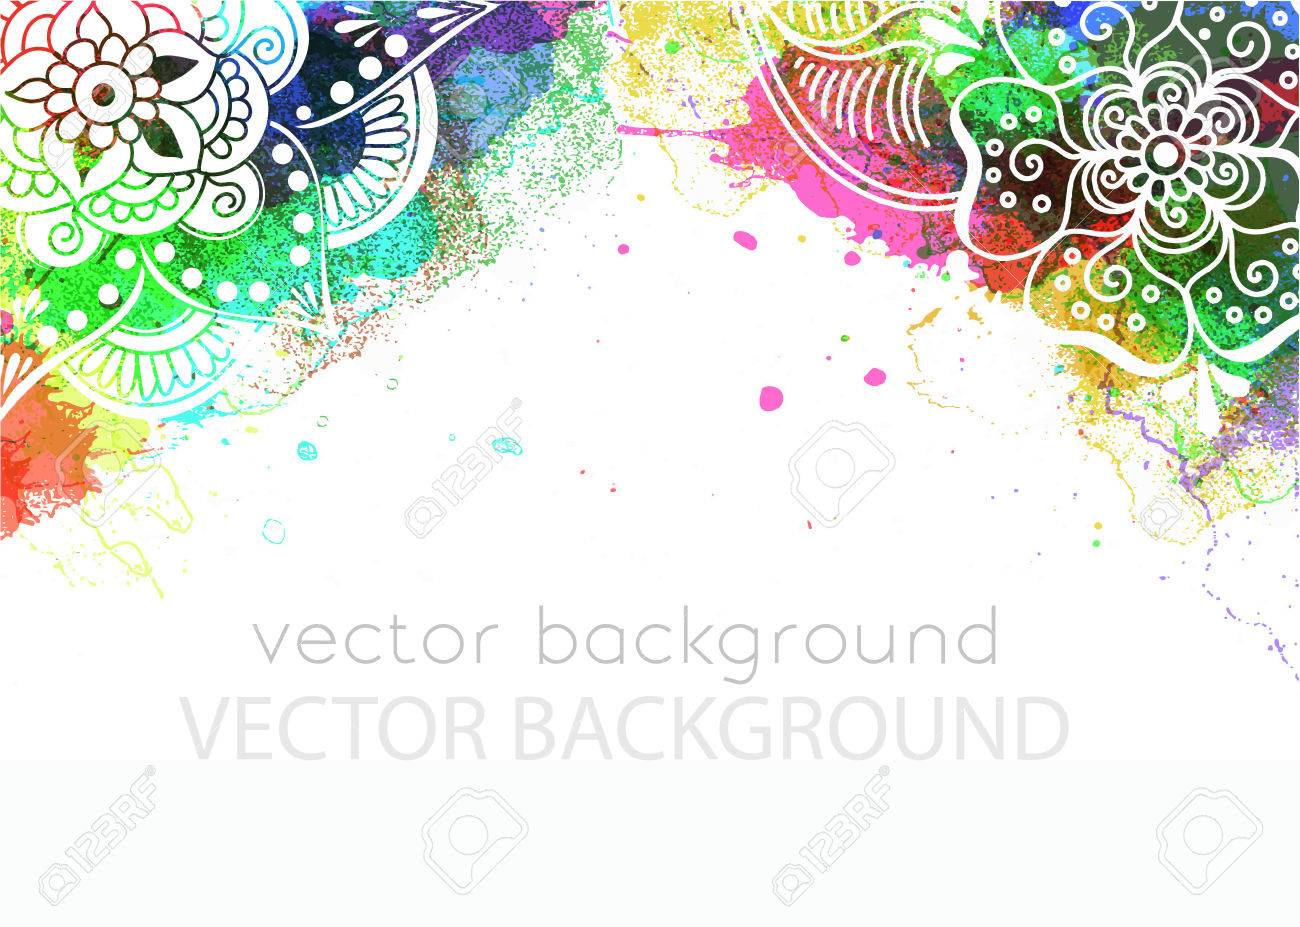 Vector Abstract Ethnic Background With Henna Patterns Stock